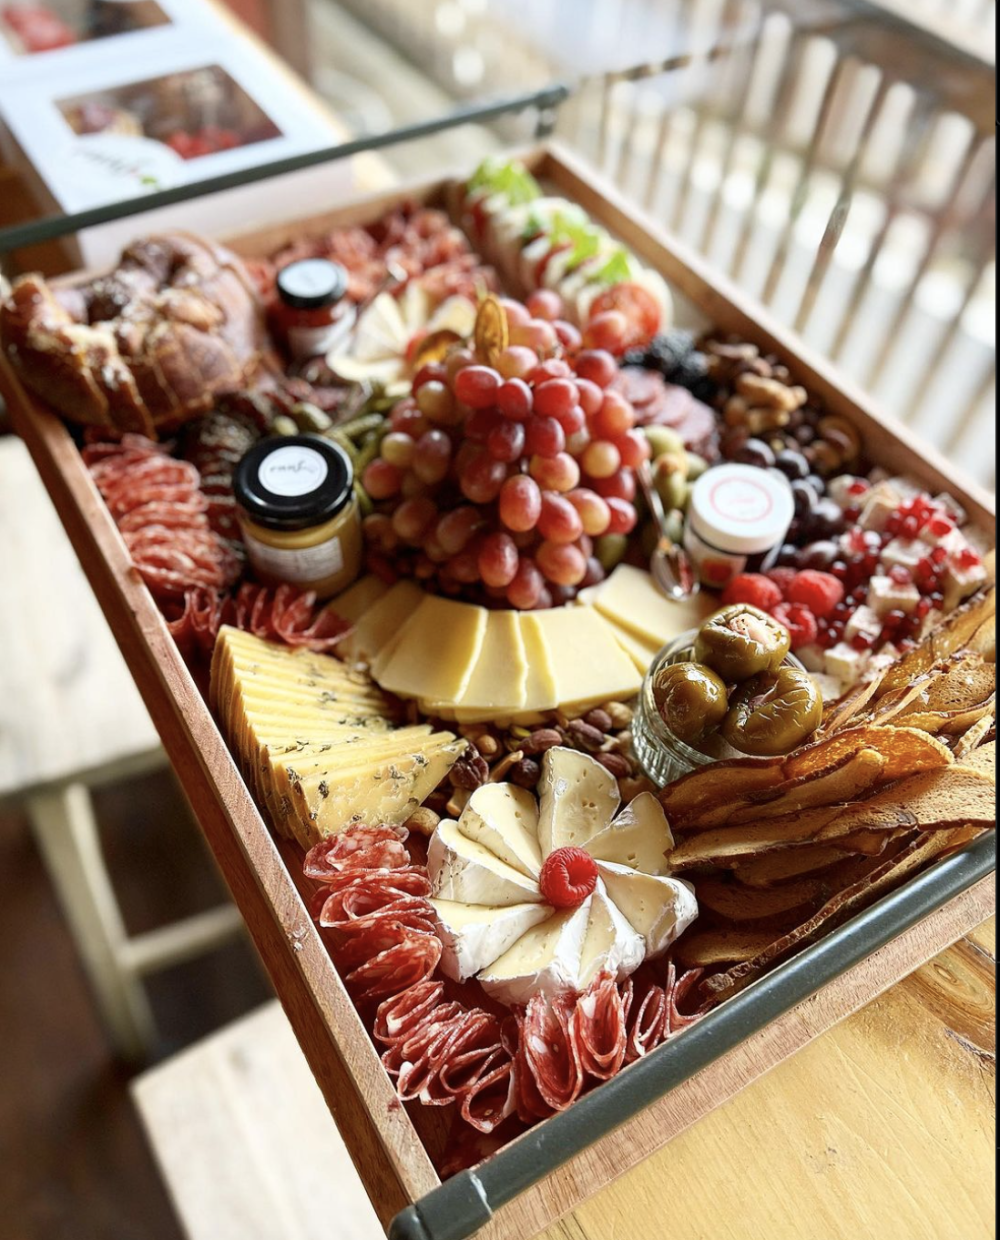 A charcuterie board with an assortment of meats, cheeses, peppers, grapes, mustard, bagel chips and more